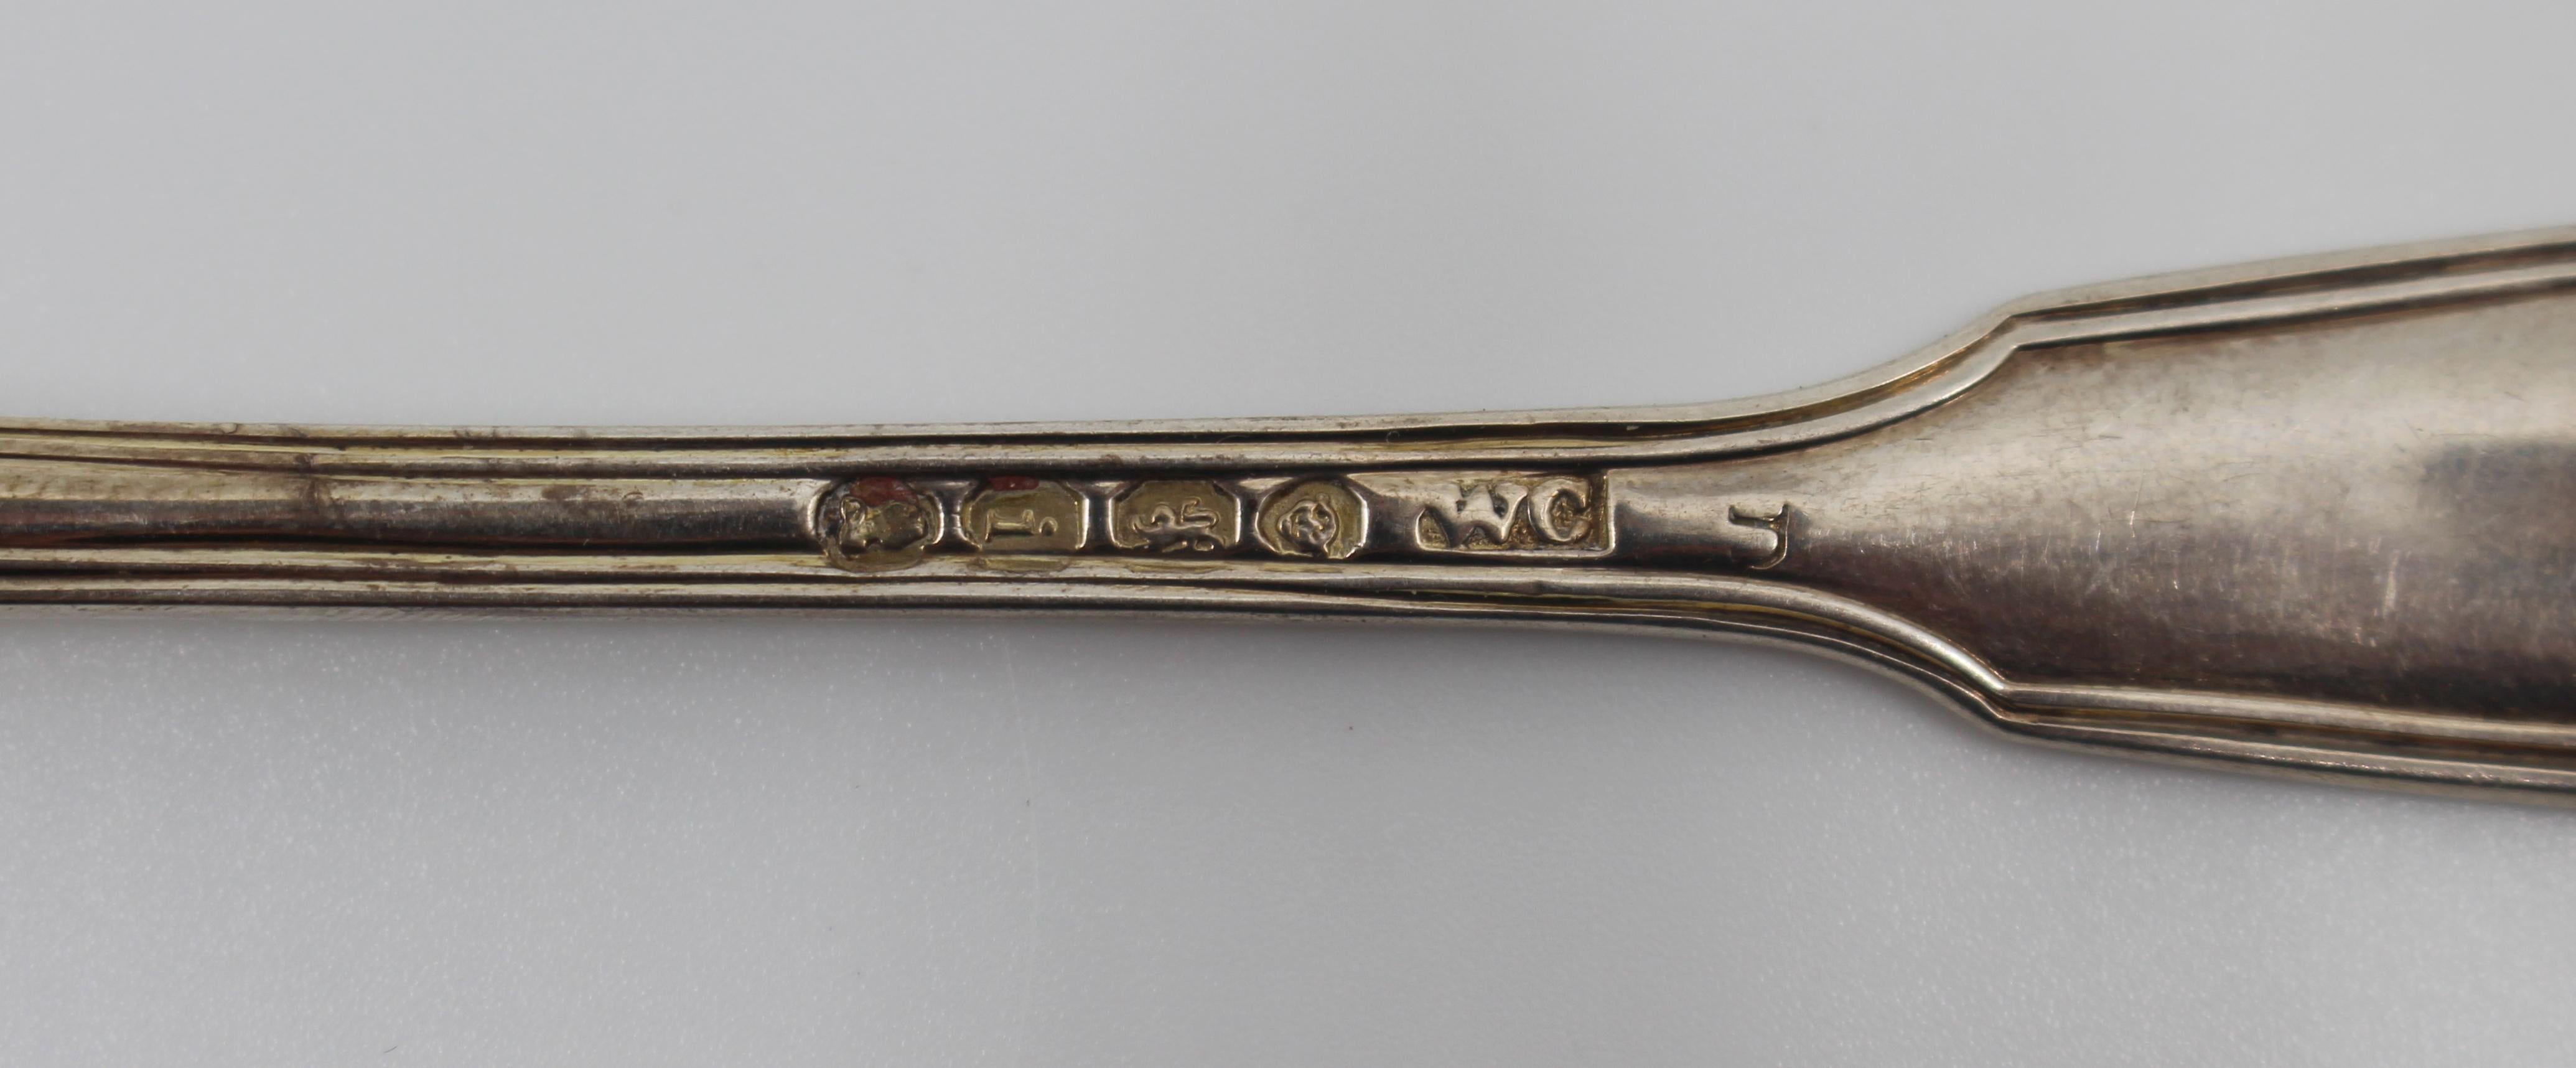 Solid Silver Crested Mustard Spoon by William Chawner London 1824 For Sale 2